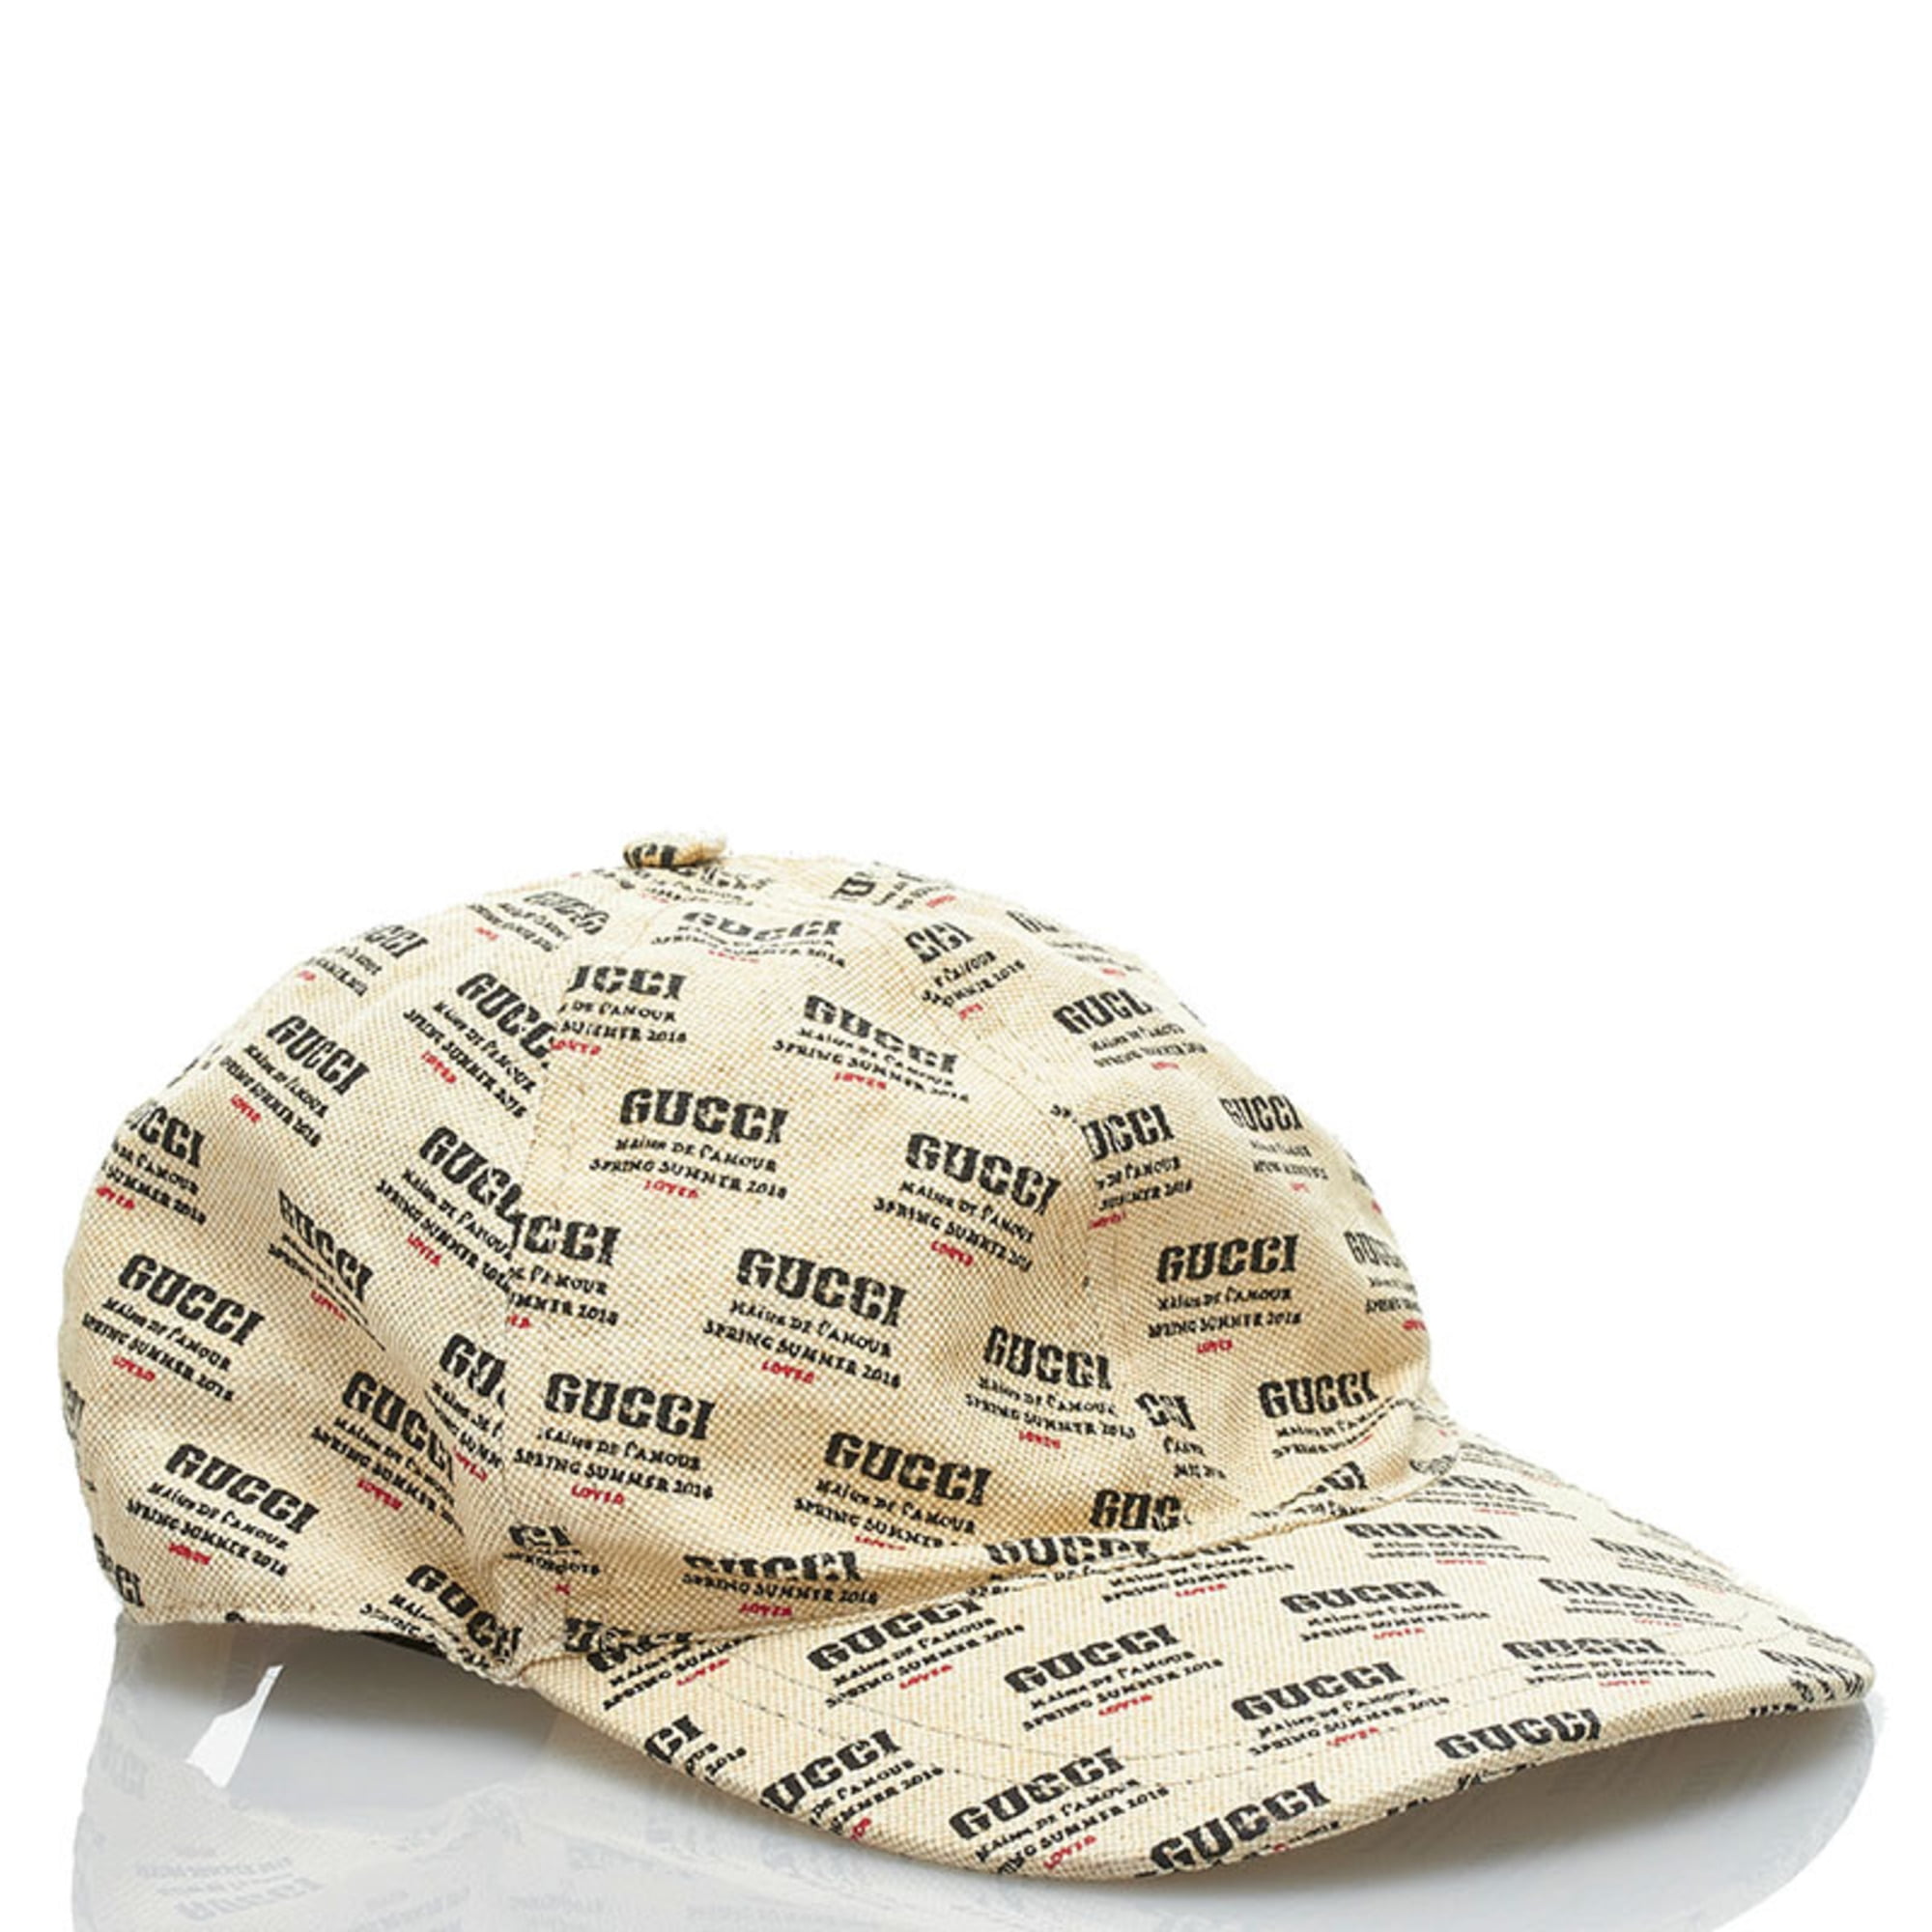 provokere Hen imod Ikke moderigtigt Authenticated Used Gucci Stamp Baseball Cap White Ivory Rayon Cotton Men's  GUCCI - Walmart.com